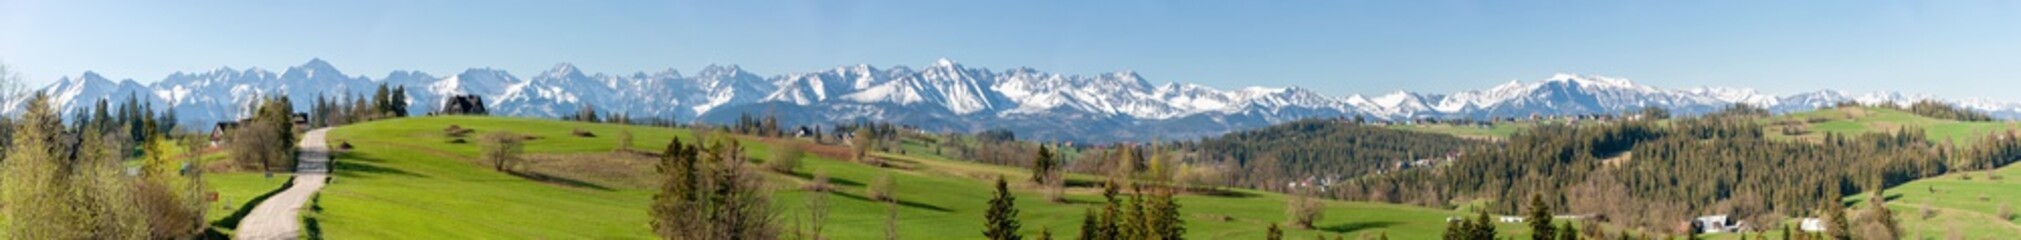 Wide panorama of  the Tatra Mountains in spring, with a village paved road, highlander houses, forests and green grass pasture